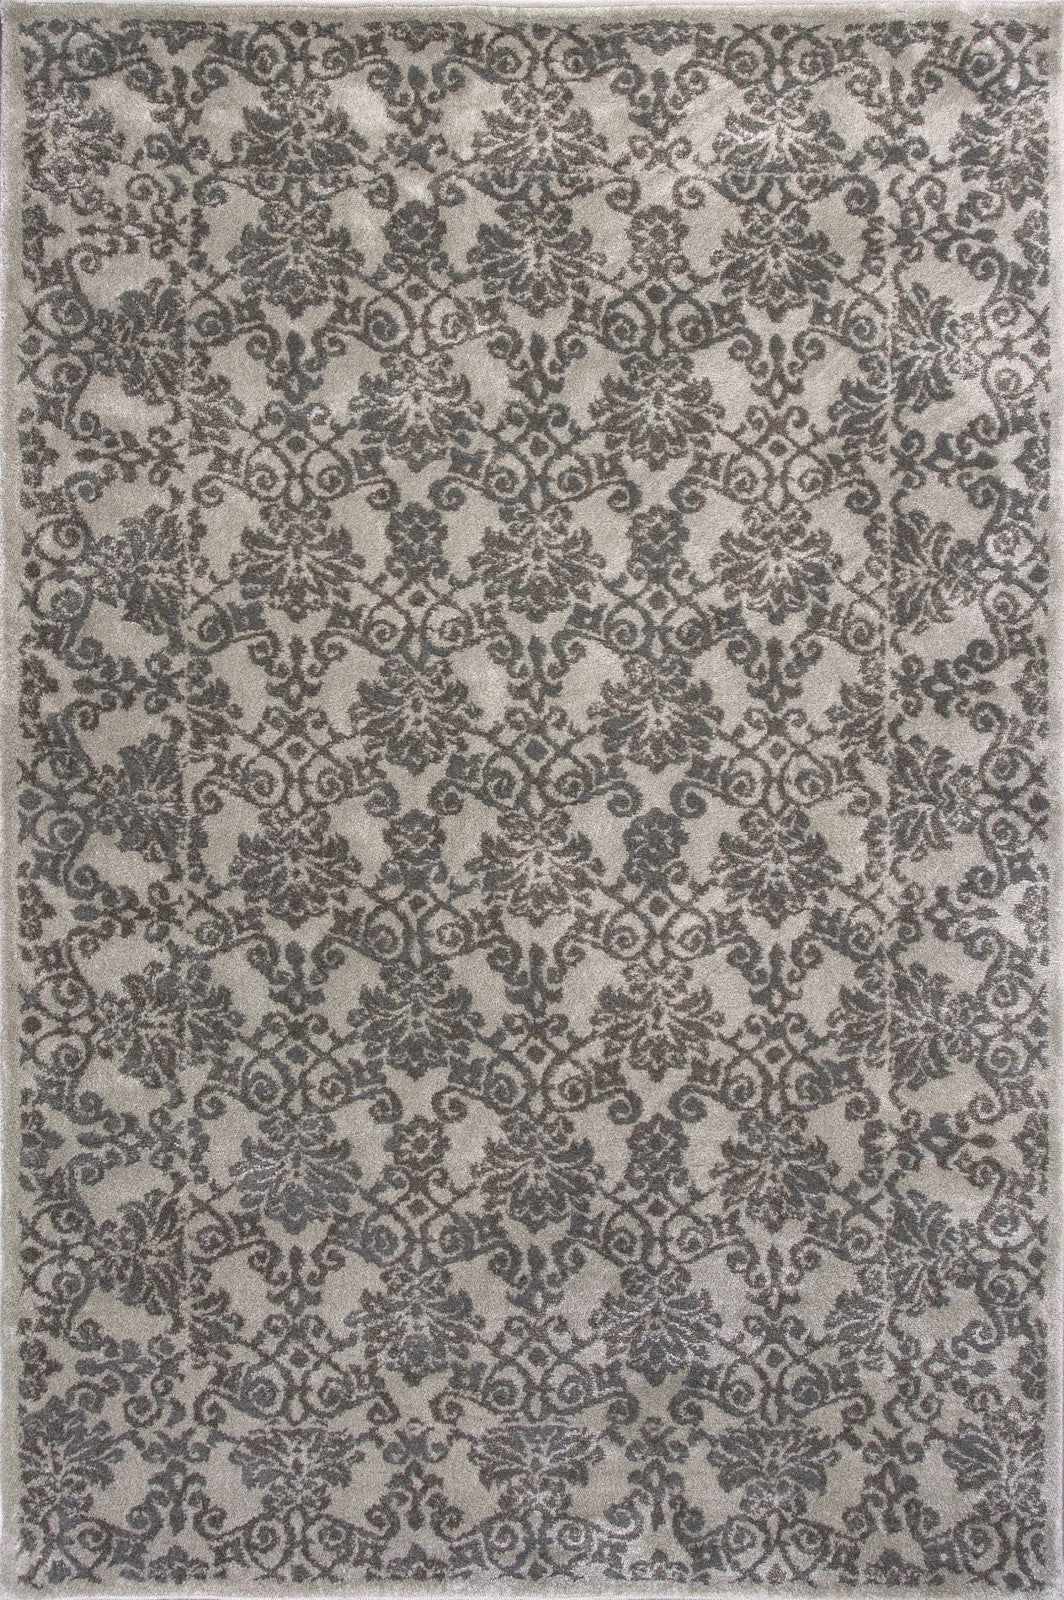 KAS Home Timeless 8001 Silver Tranquility Machine Woven Area Rug by Donny Osmond